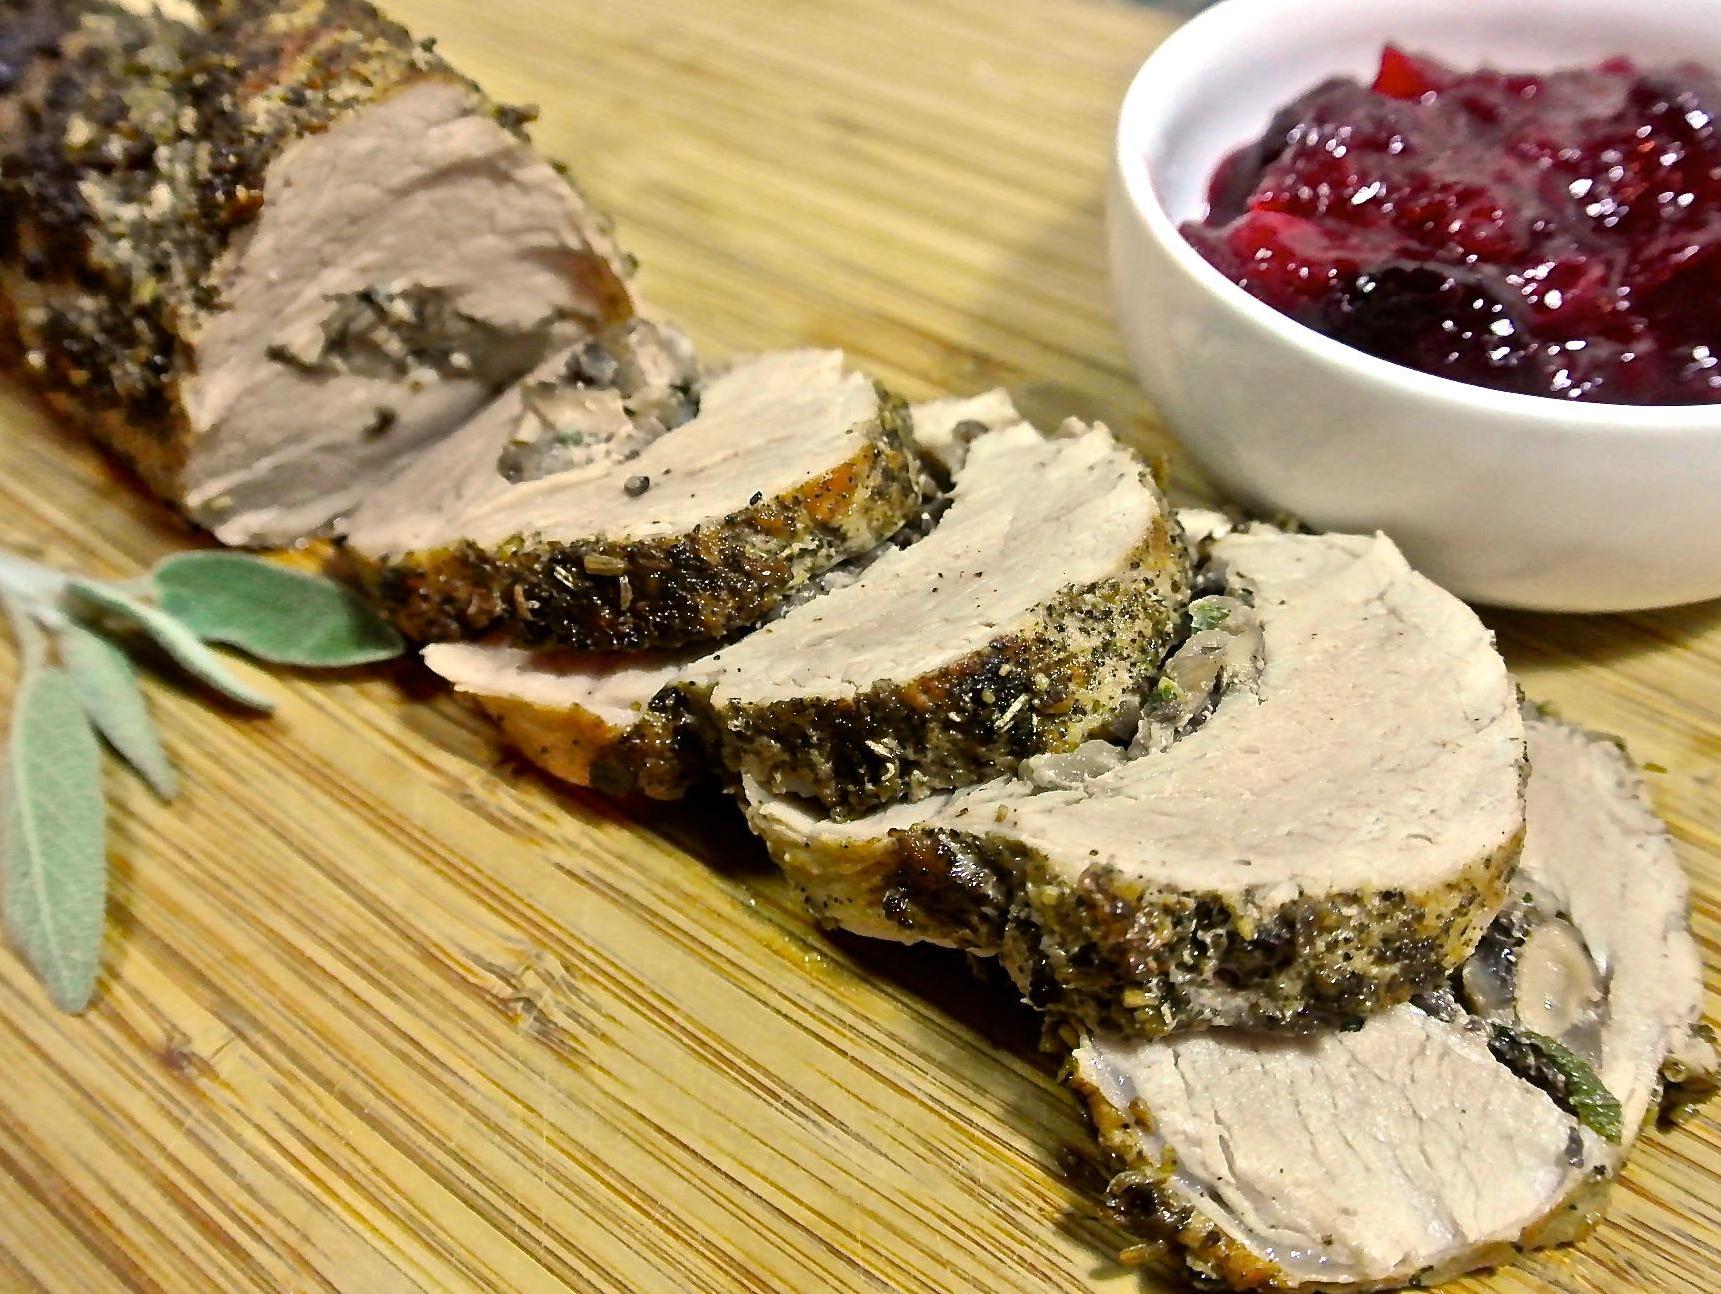 Easy and Delicious: Port Wine and Mushroom Stuffed Pork